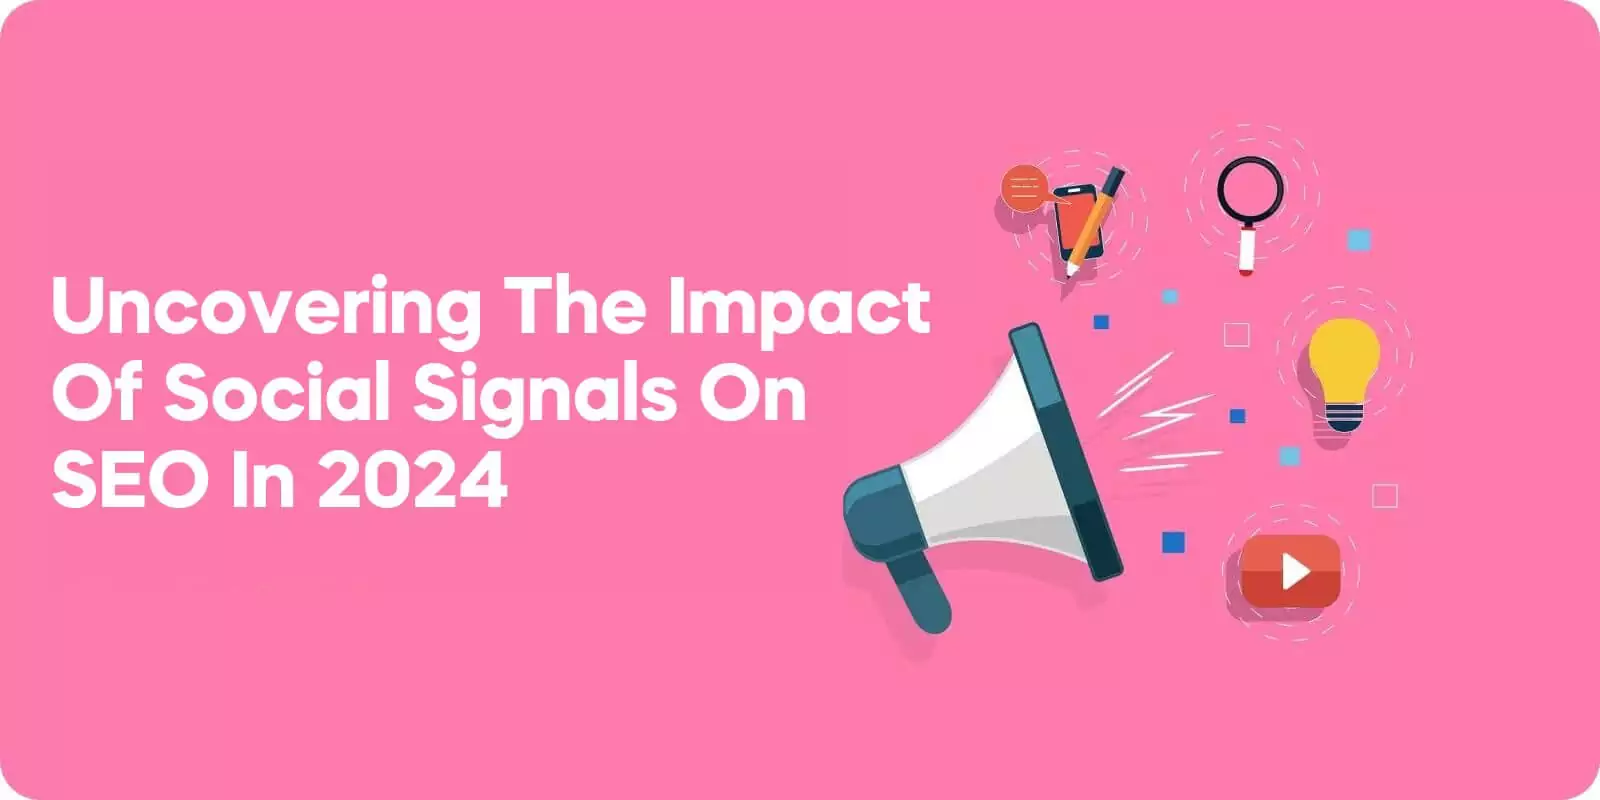 Uncovering the Impact of Social Signals on SEO in 2024